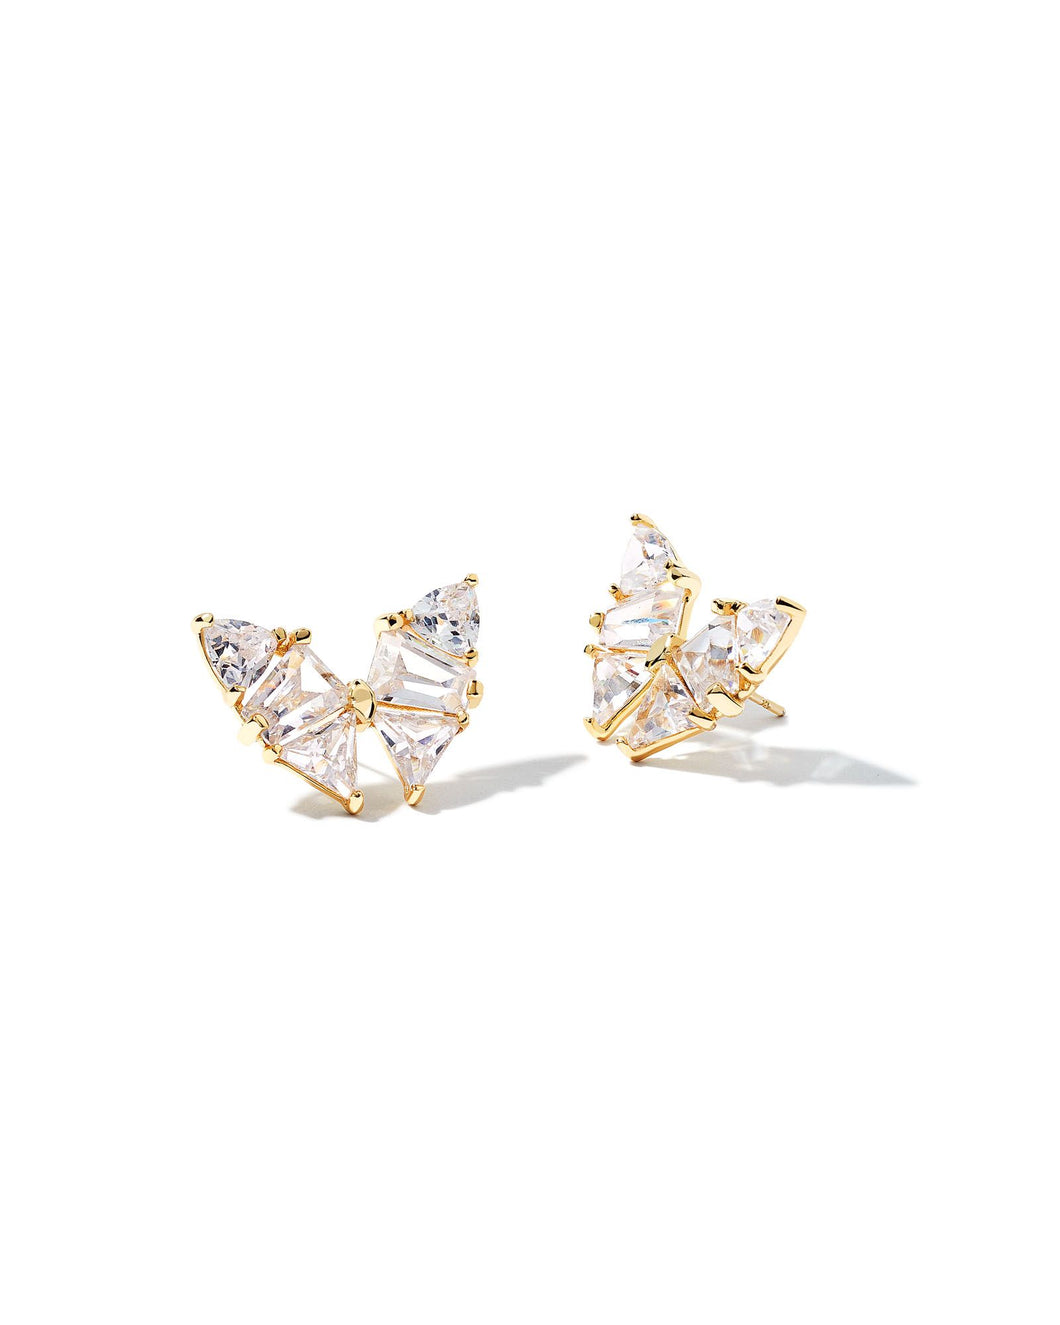 BLAIR BUTTERFLY STUD EARRINGS GOLD WHITE CRYSTAL